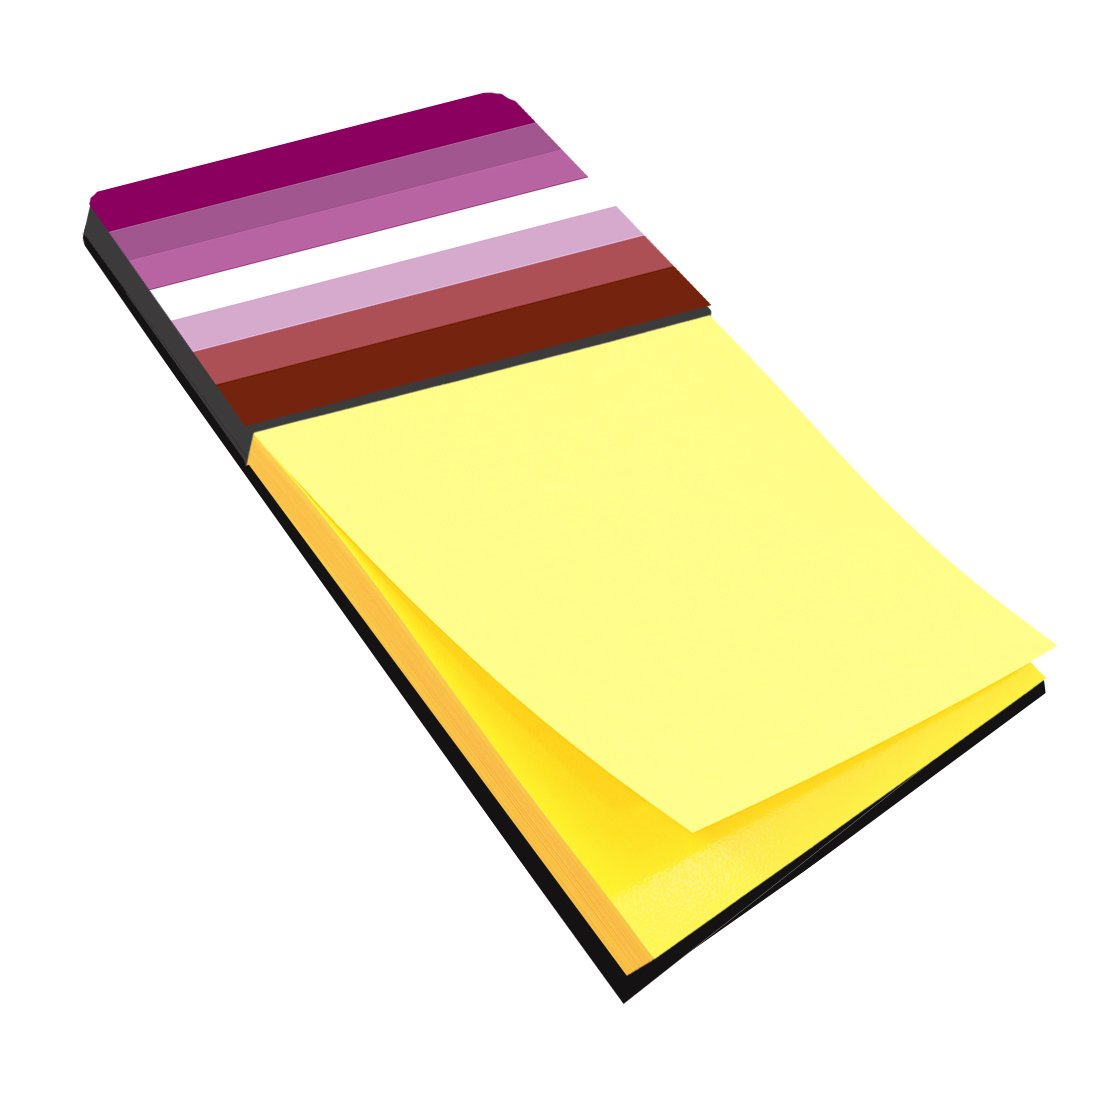 Buy this Lesbian Pride Sticky Note Holder